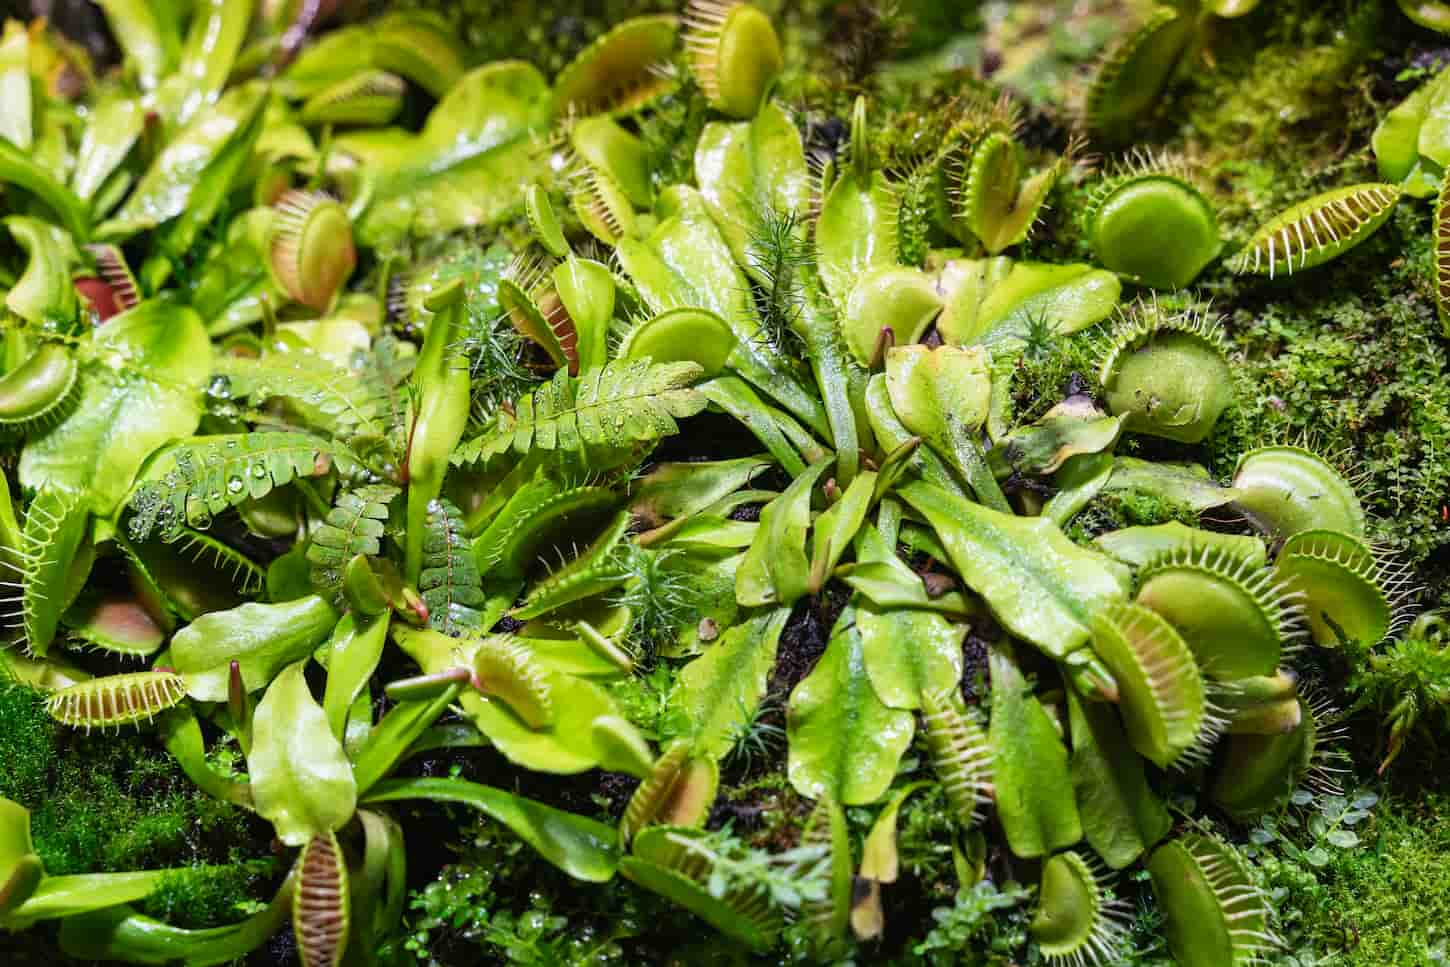 An image of a plant predator called Venus flytrap, green jaws found in the forest used as a trap for mosquitoes and other insects.